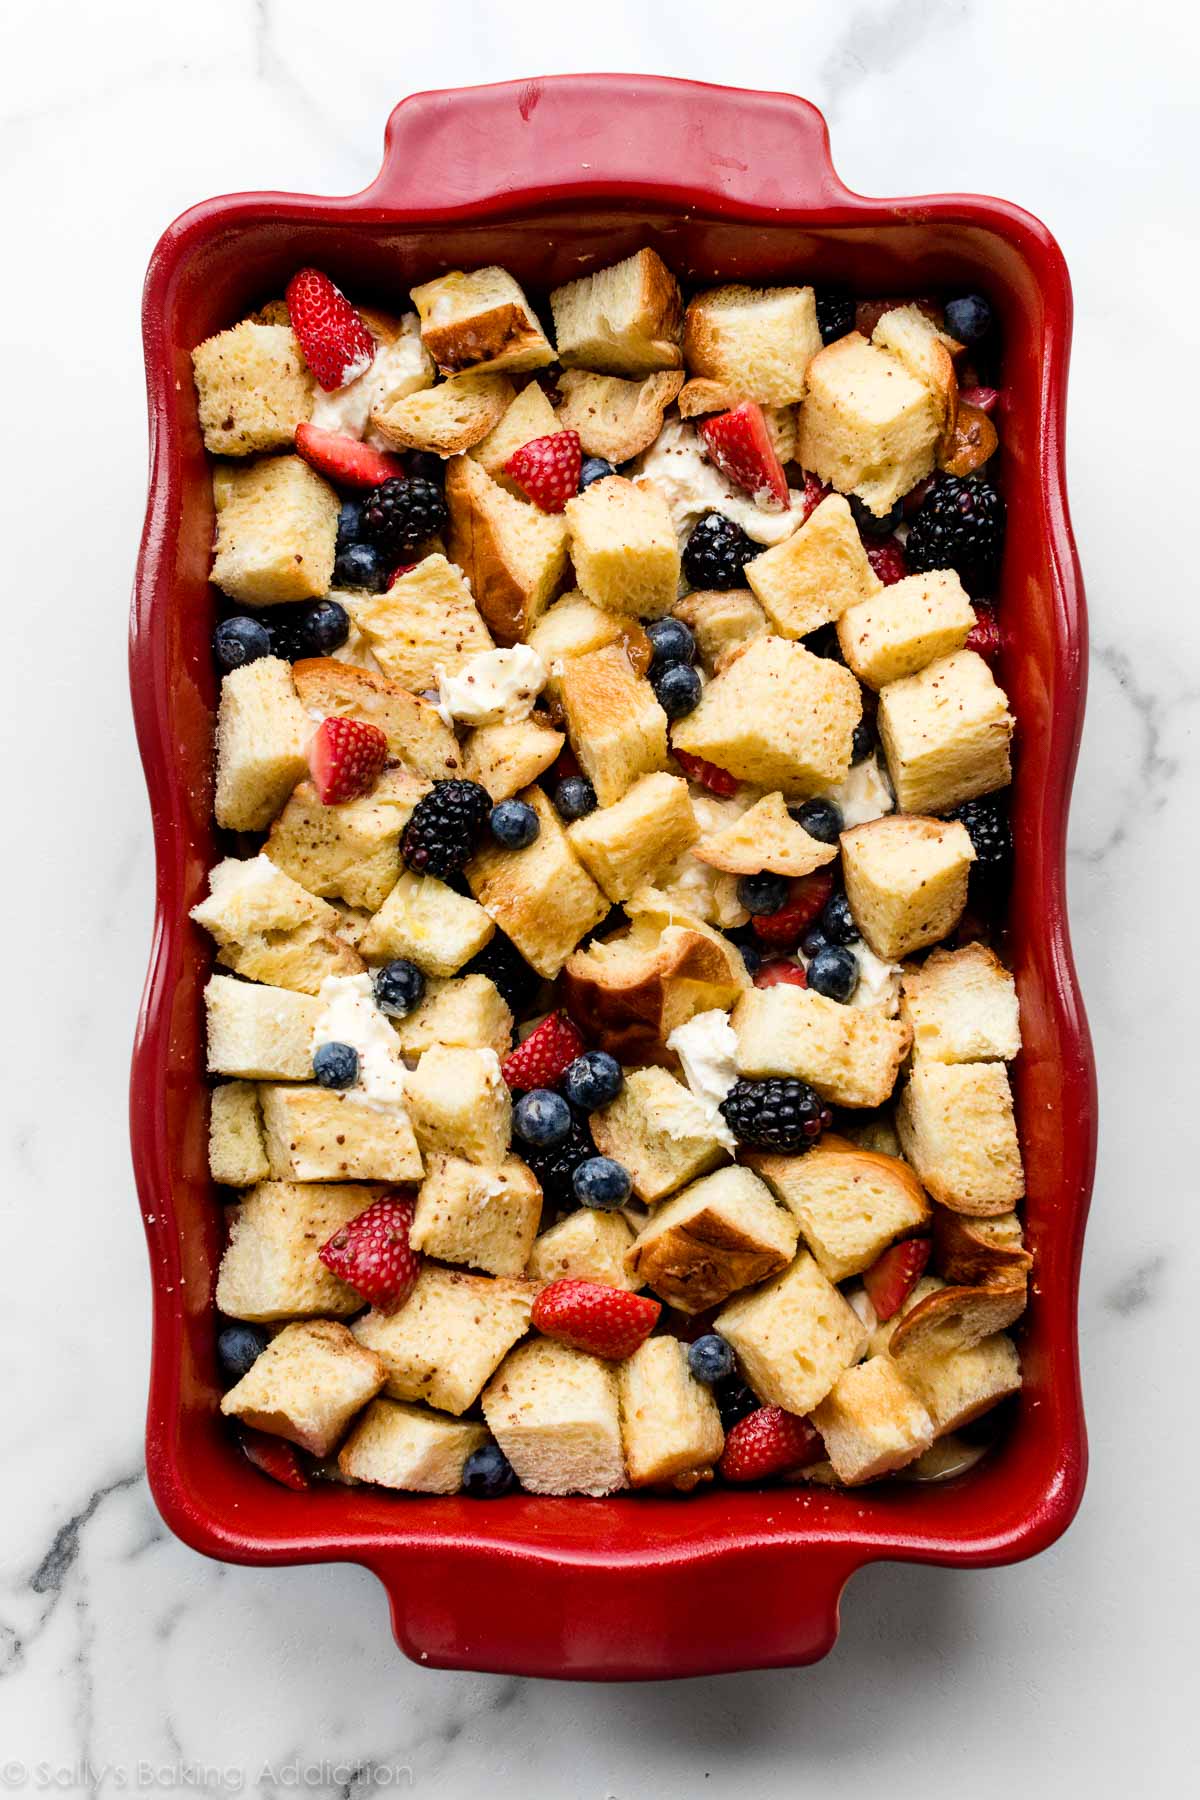 Challah bread cubes, berries and cream cheese in a red casserole